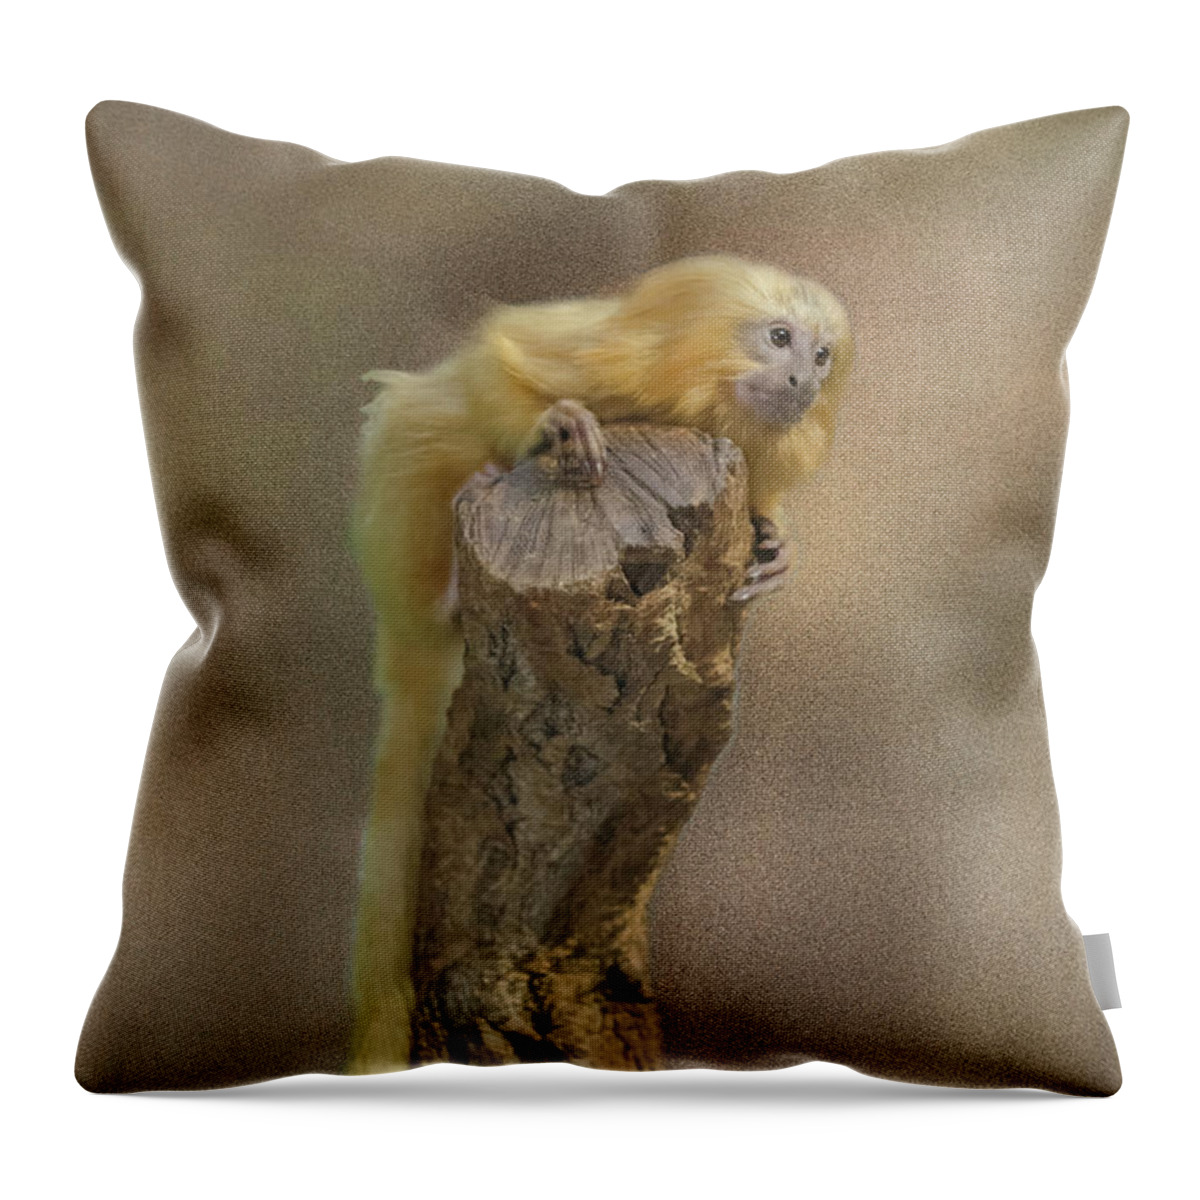 Adorable Throw Pillow featuring the photograph Golden Lion Tamarin by Michelle Meenawong